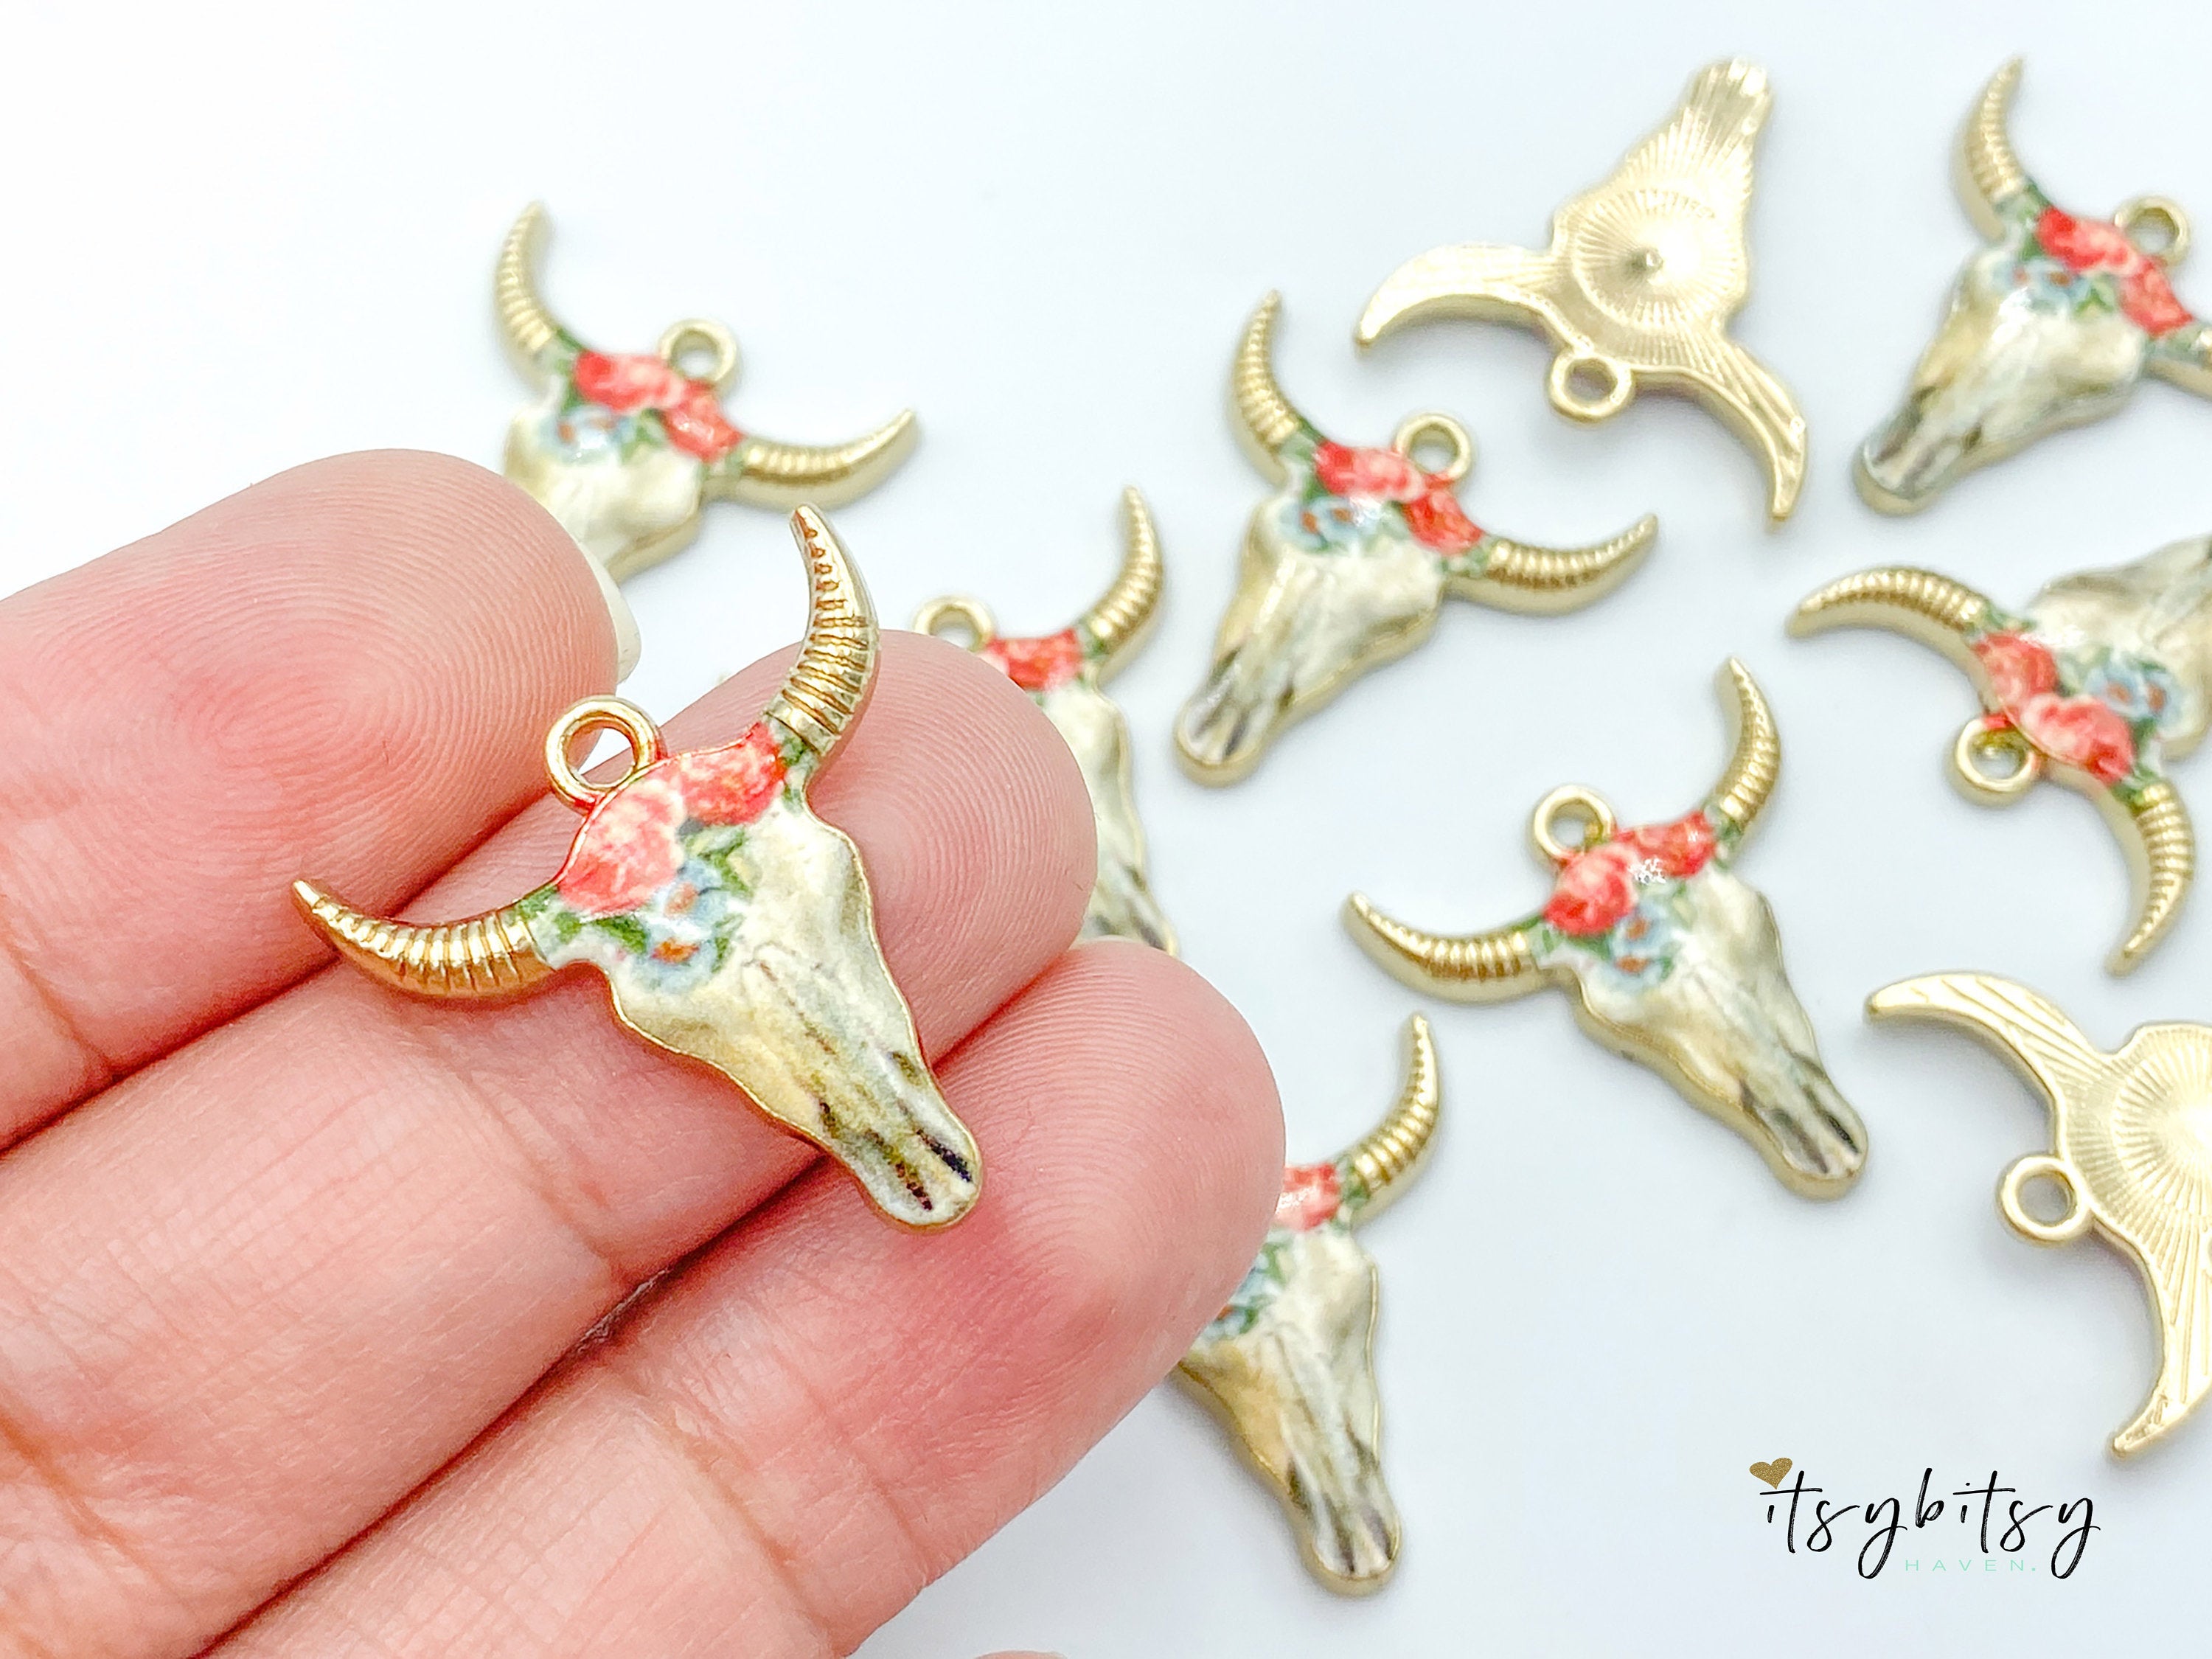 2pcs, 22x21mm, Zinc Based Alloy Bohemian Boho Charms Bull Cow Animal charm in Gold Plating, Coral and Light Blue Floral Enamel